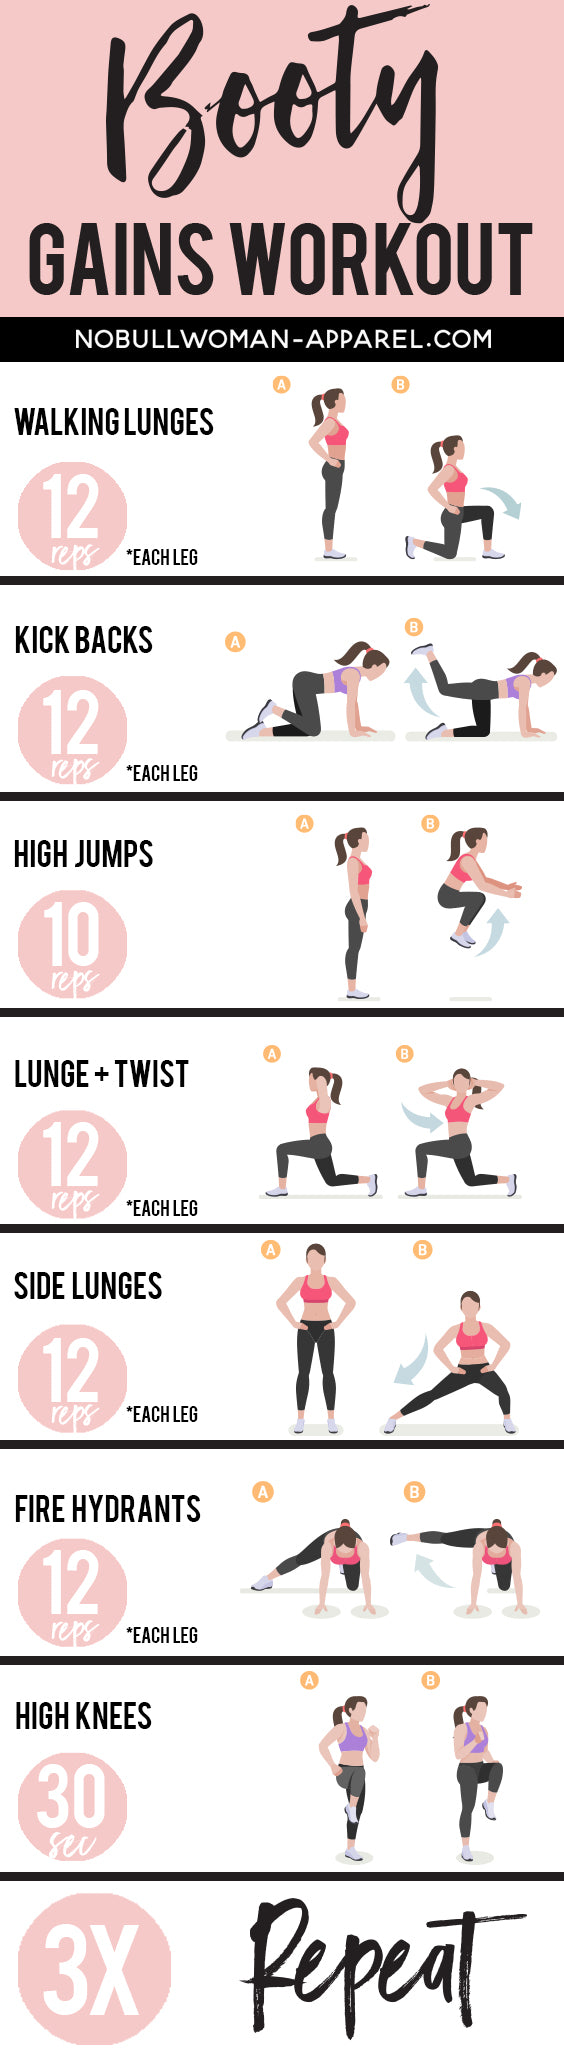 Booty Gains - Printable Workout